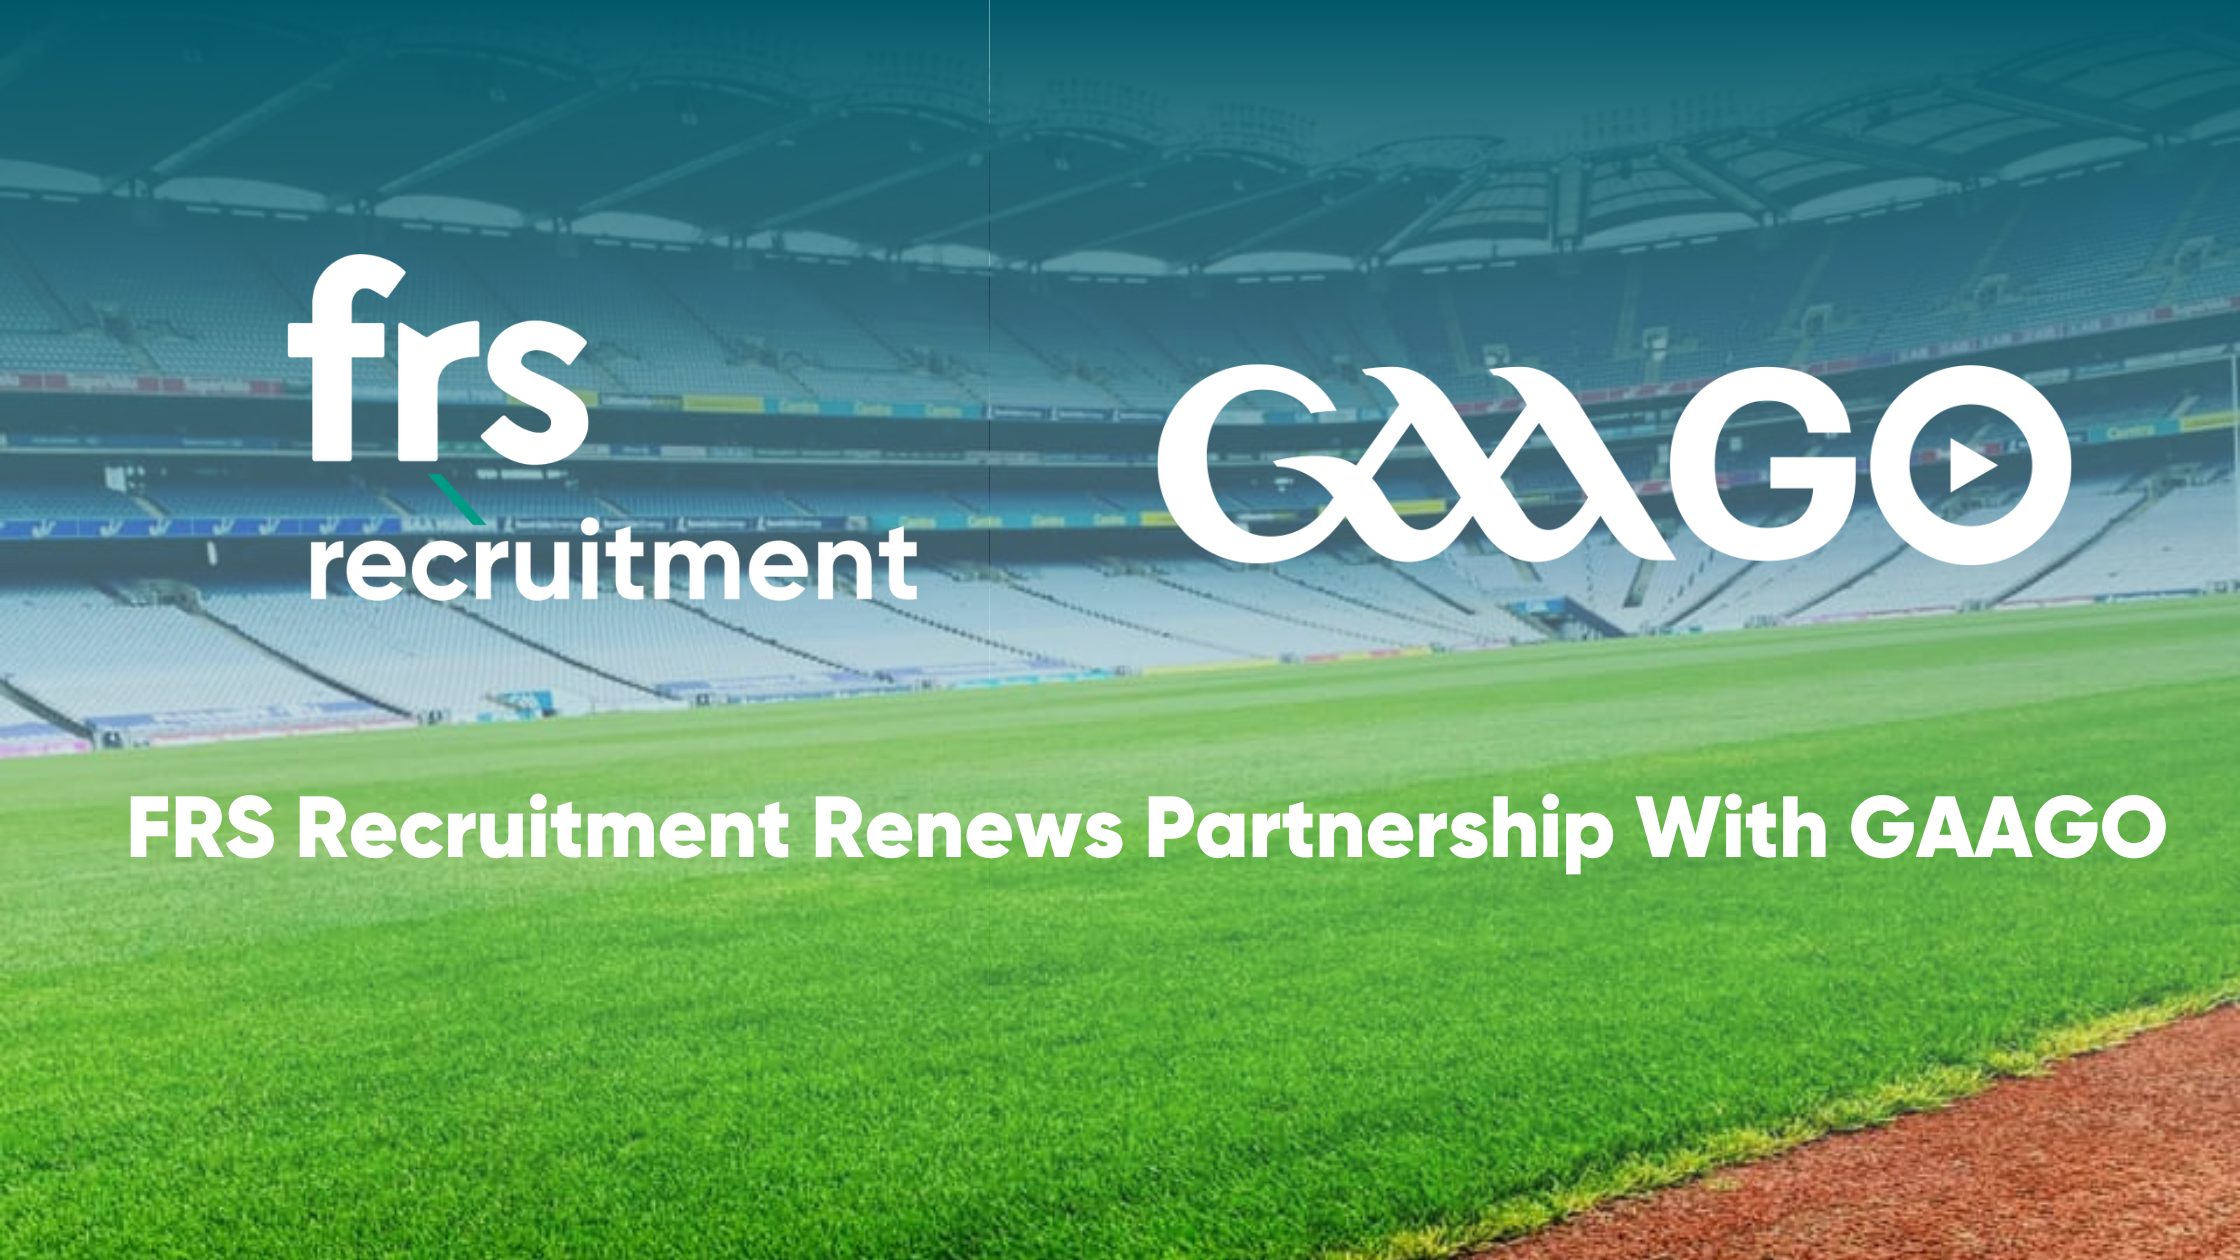 FRS Recruitment Renews Partnership with GAAGO for a Further 3 Years